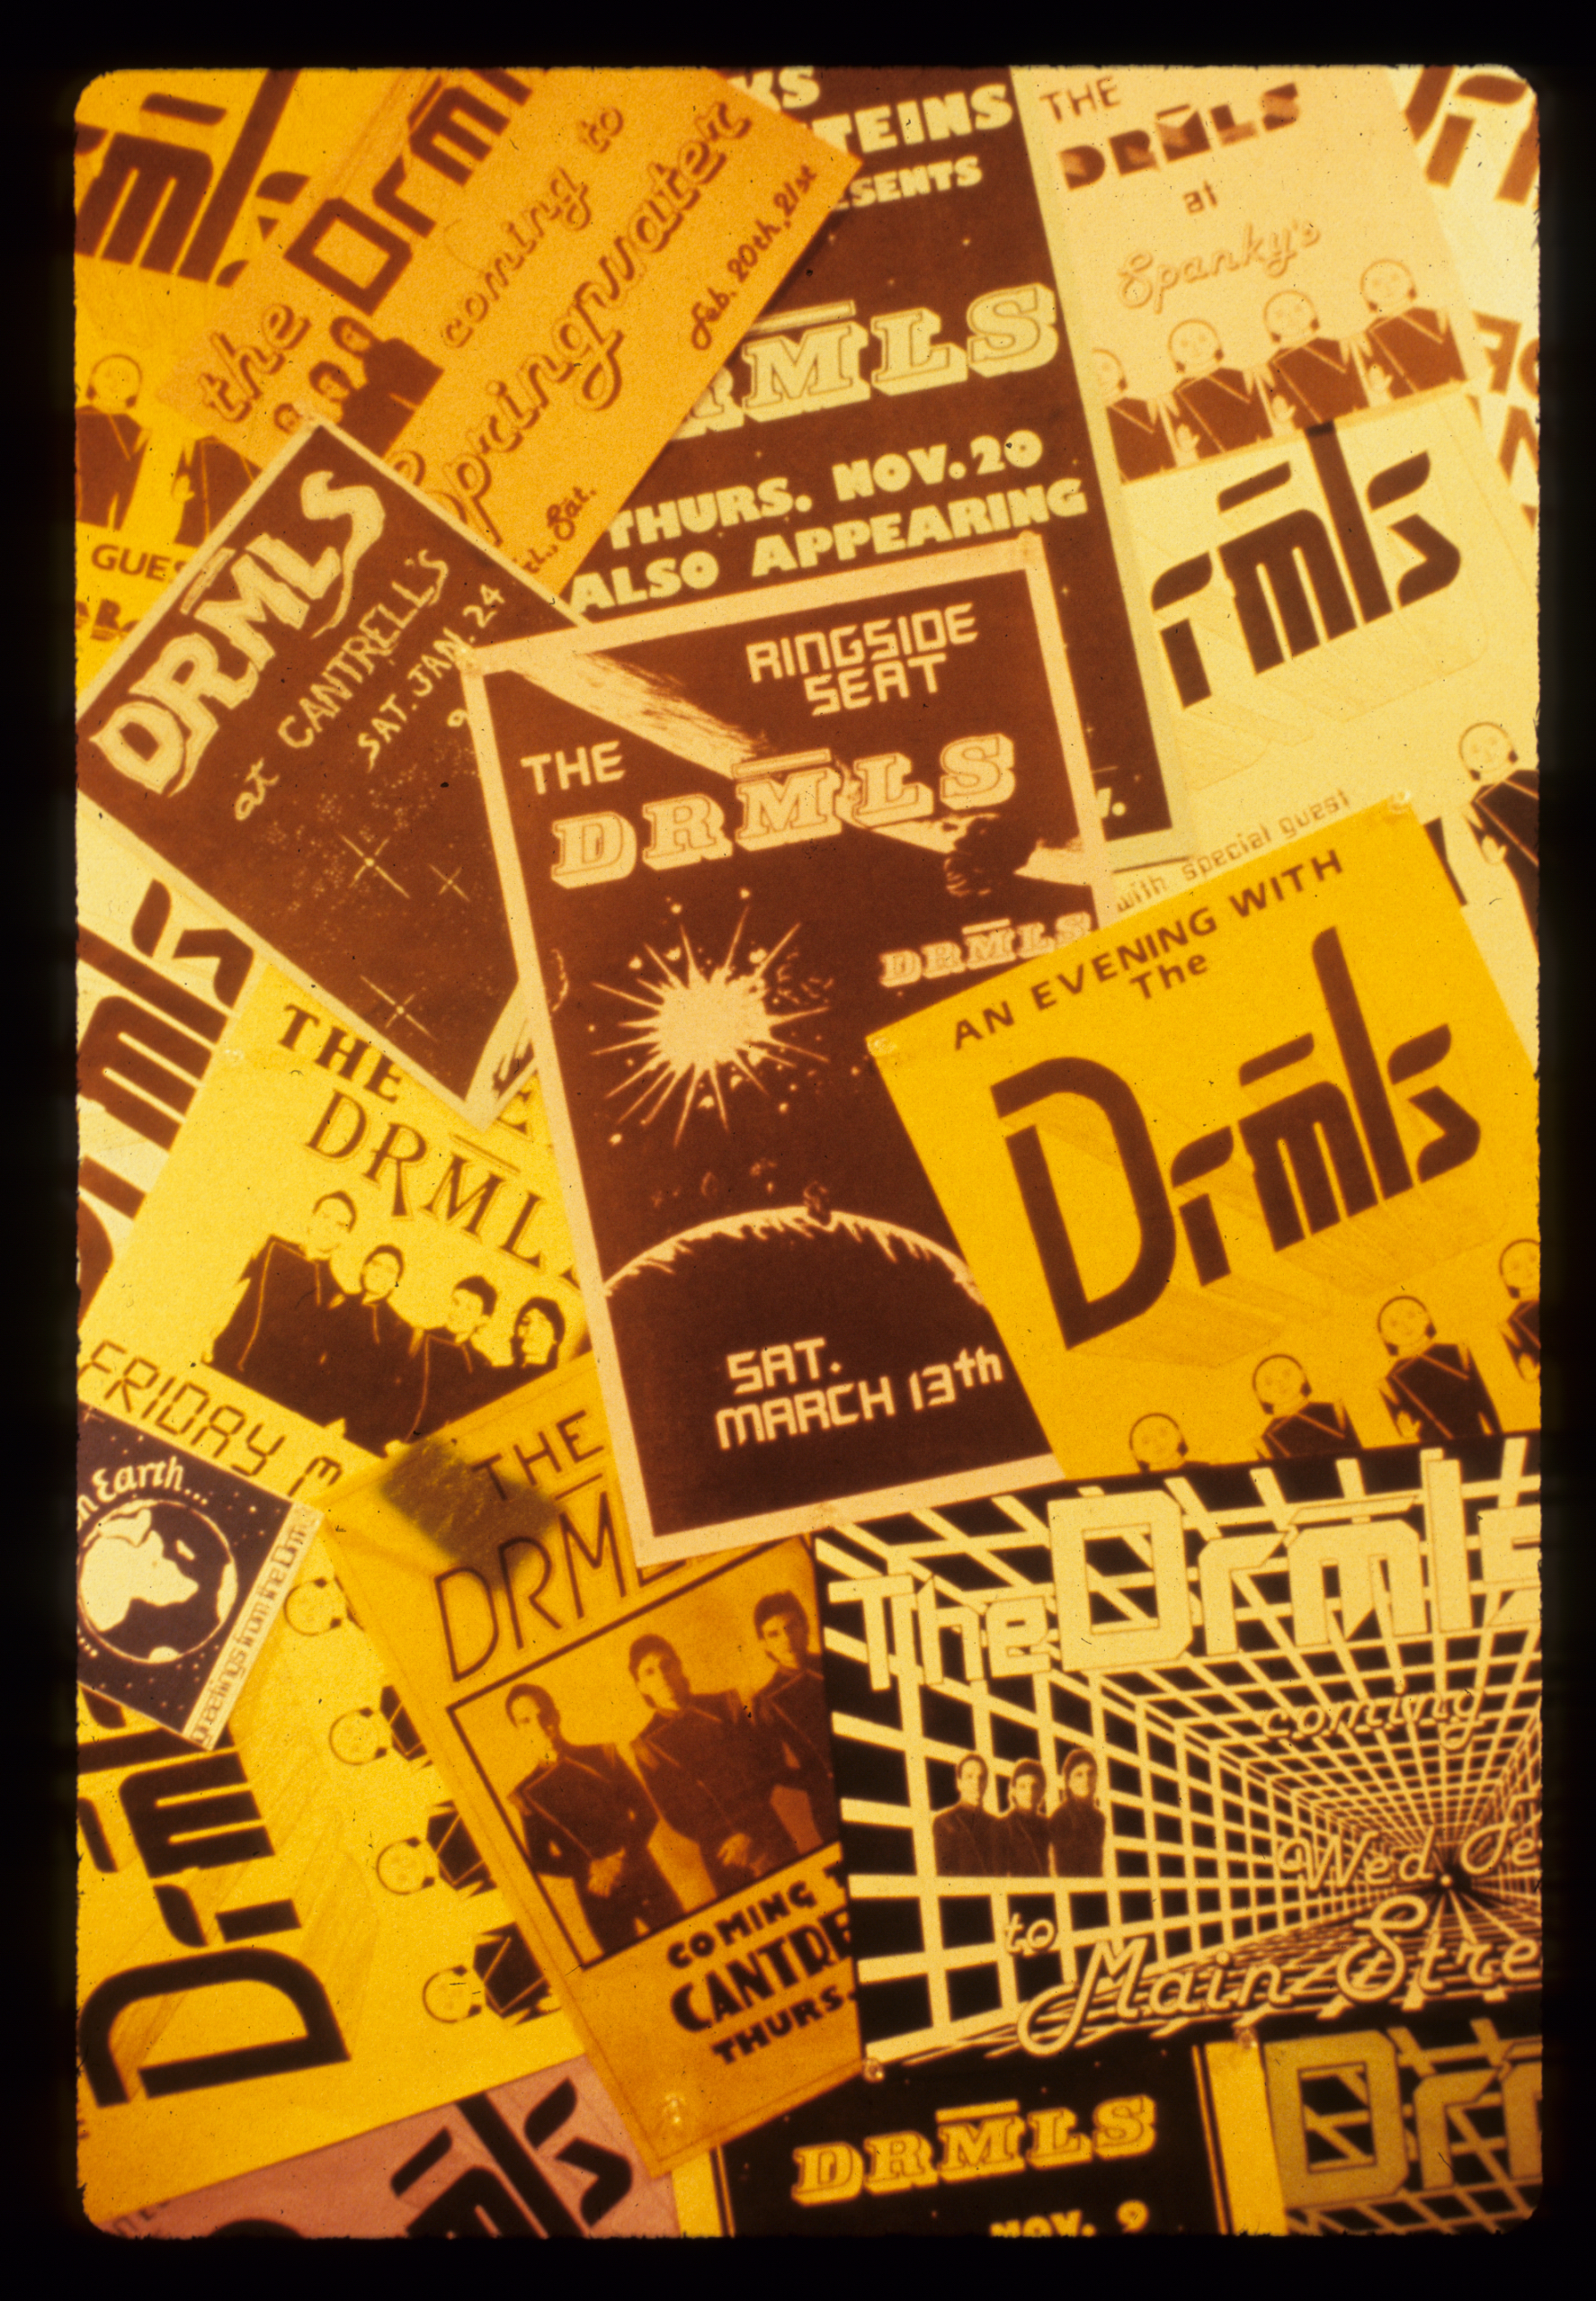 The Drmls Show Posters